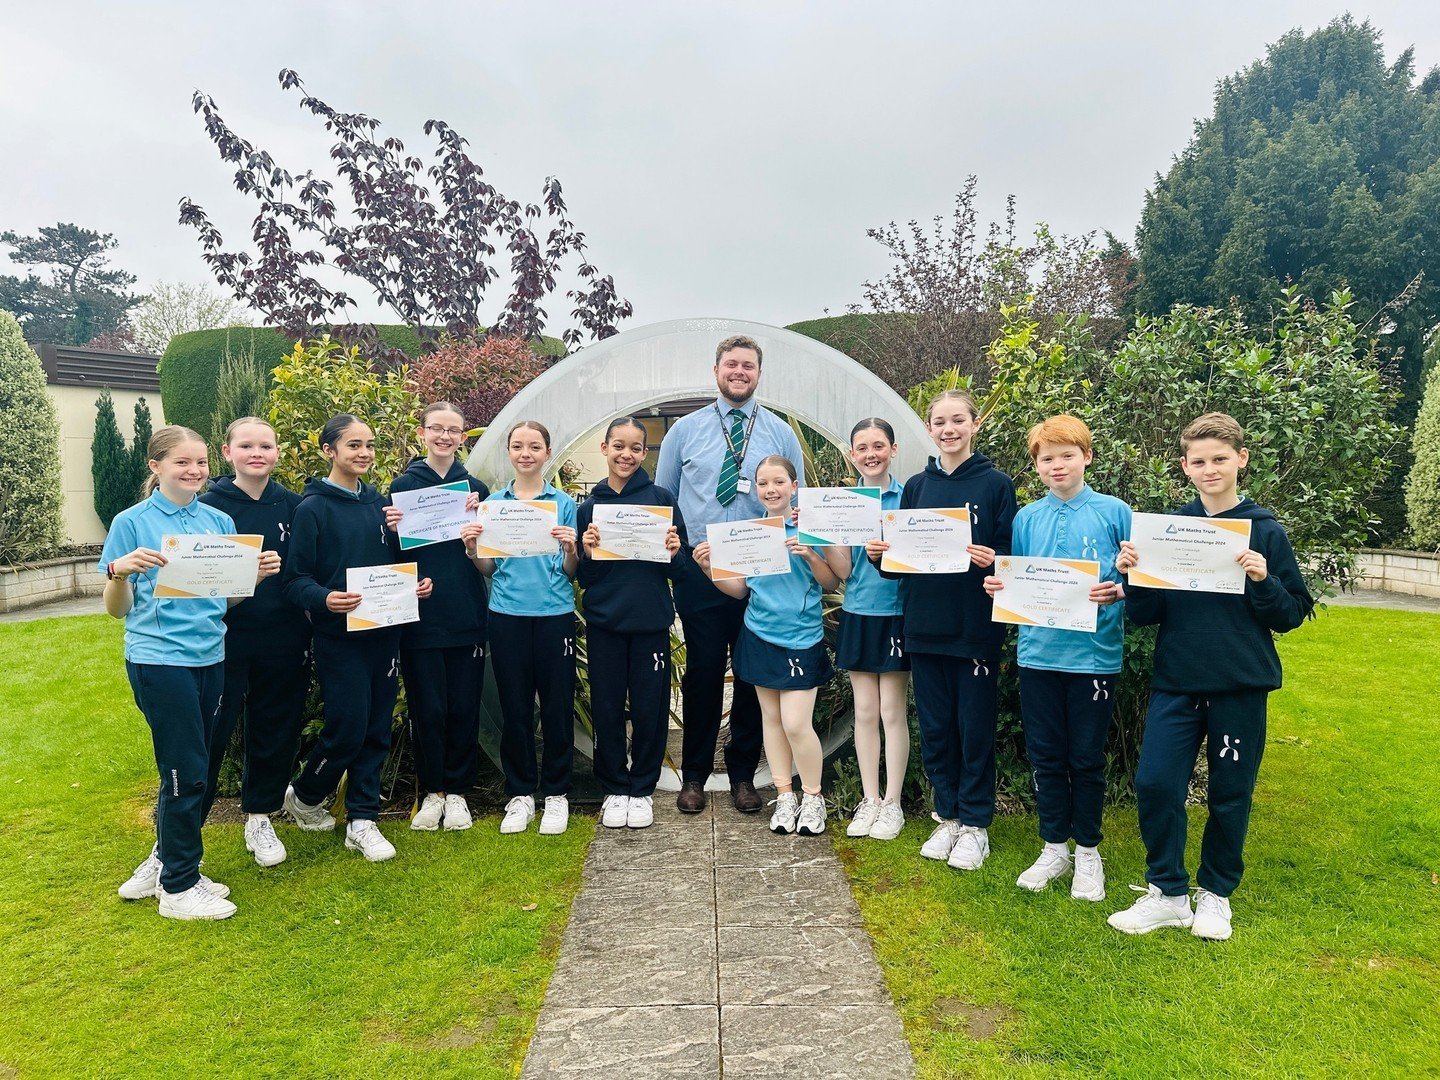 This year, our Year 7 &amp; 8 students have achieved remarkable success in the UKMT Junior Maths Challenge, a prestigious national competition for students in their age group. ⁠
⁠
Out of the 17 students who participated, an impressive 15 received bro